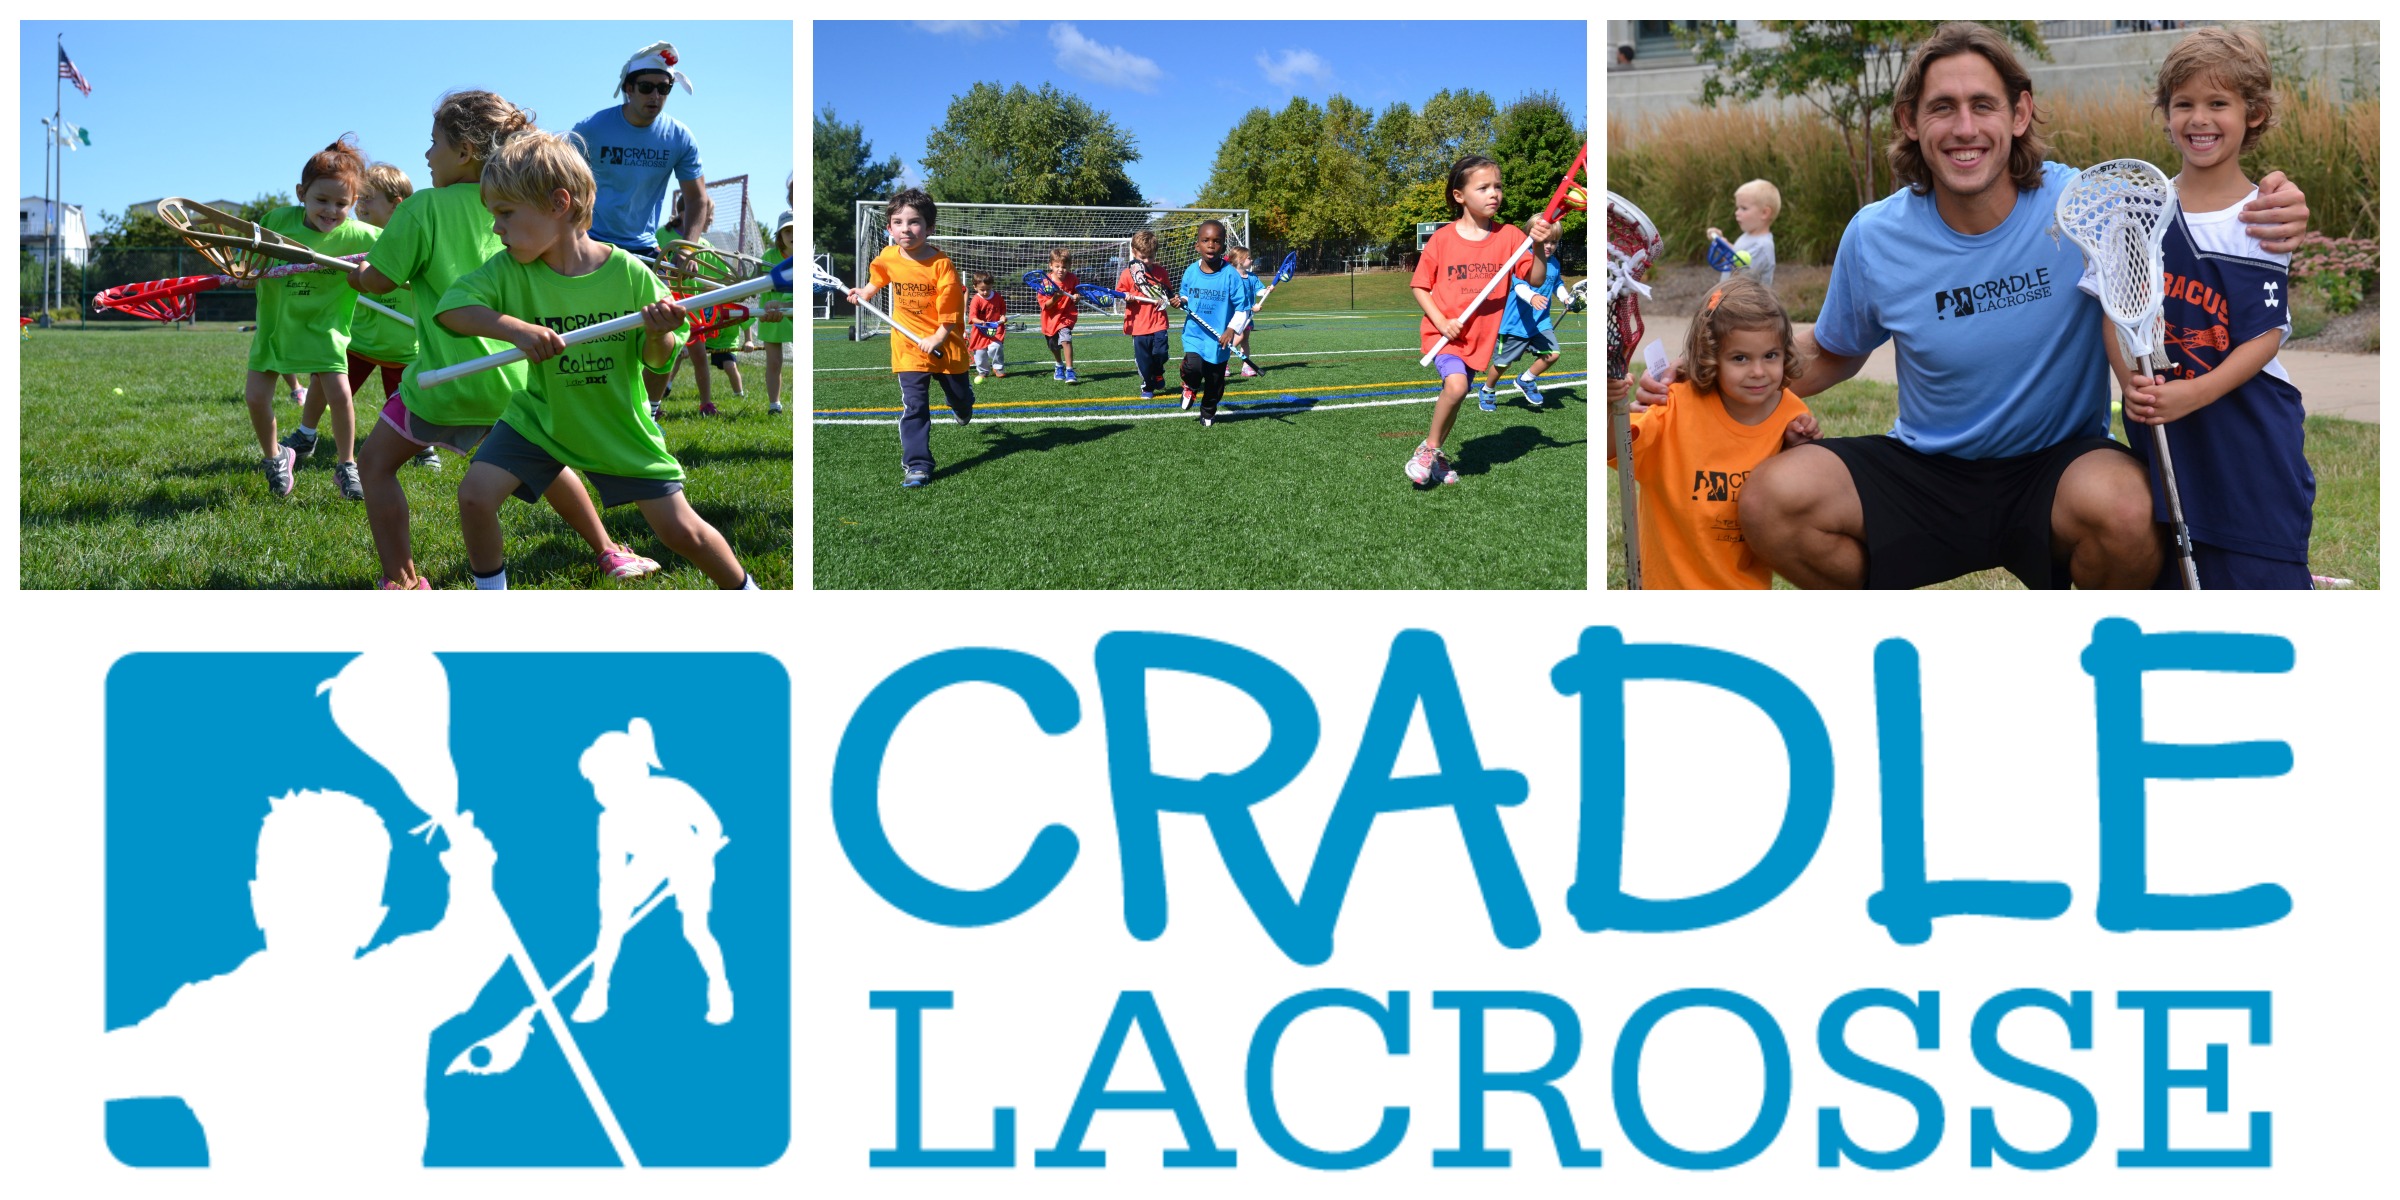 Craddle Lacrosse Collage